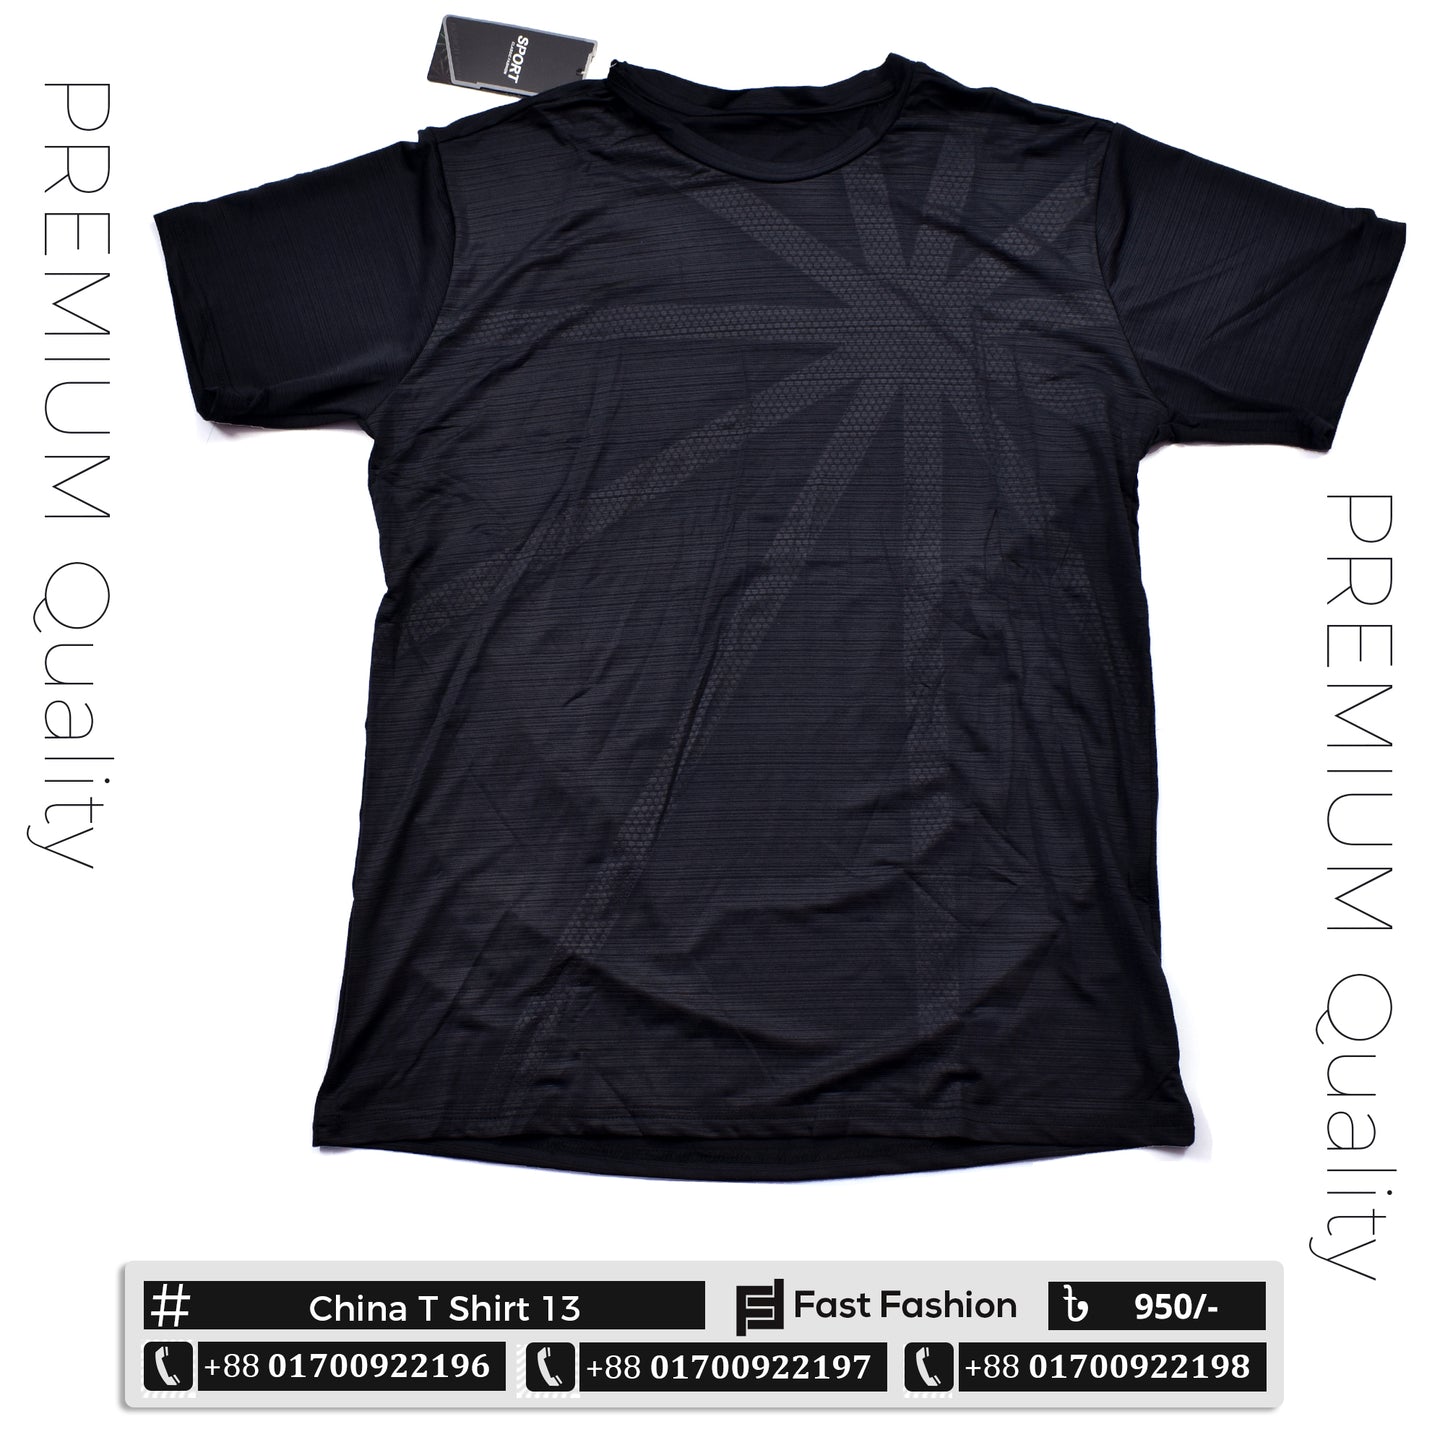 Premium Quality Stitch China T-Shirt 13 | It's all about Fabric - Extreme Comfort